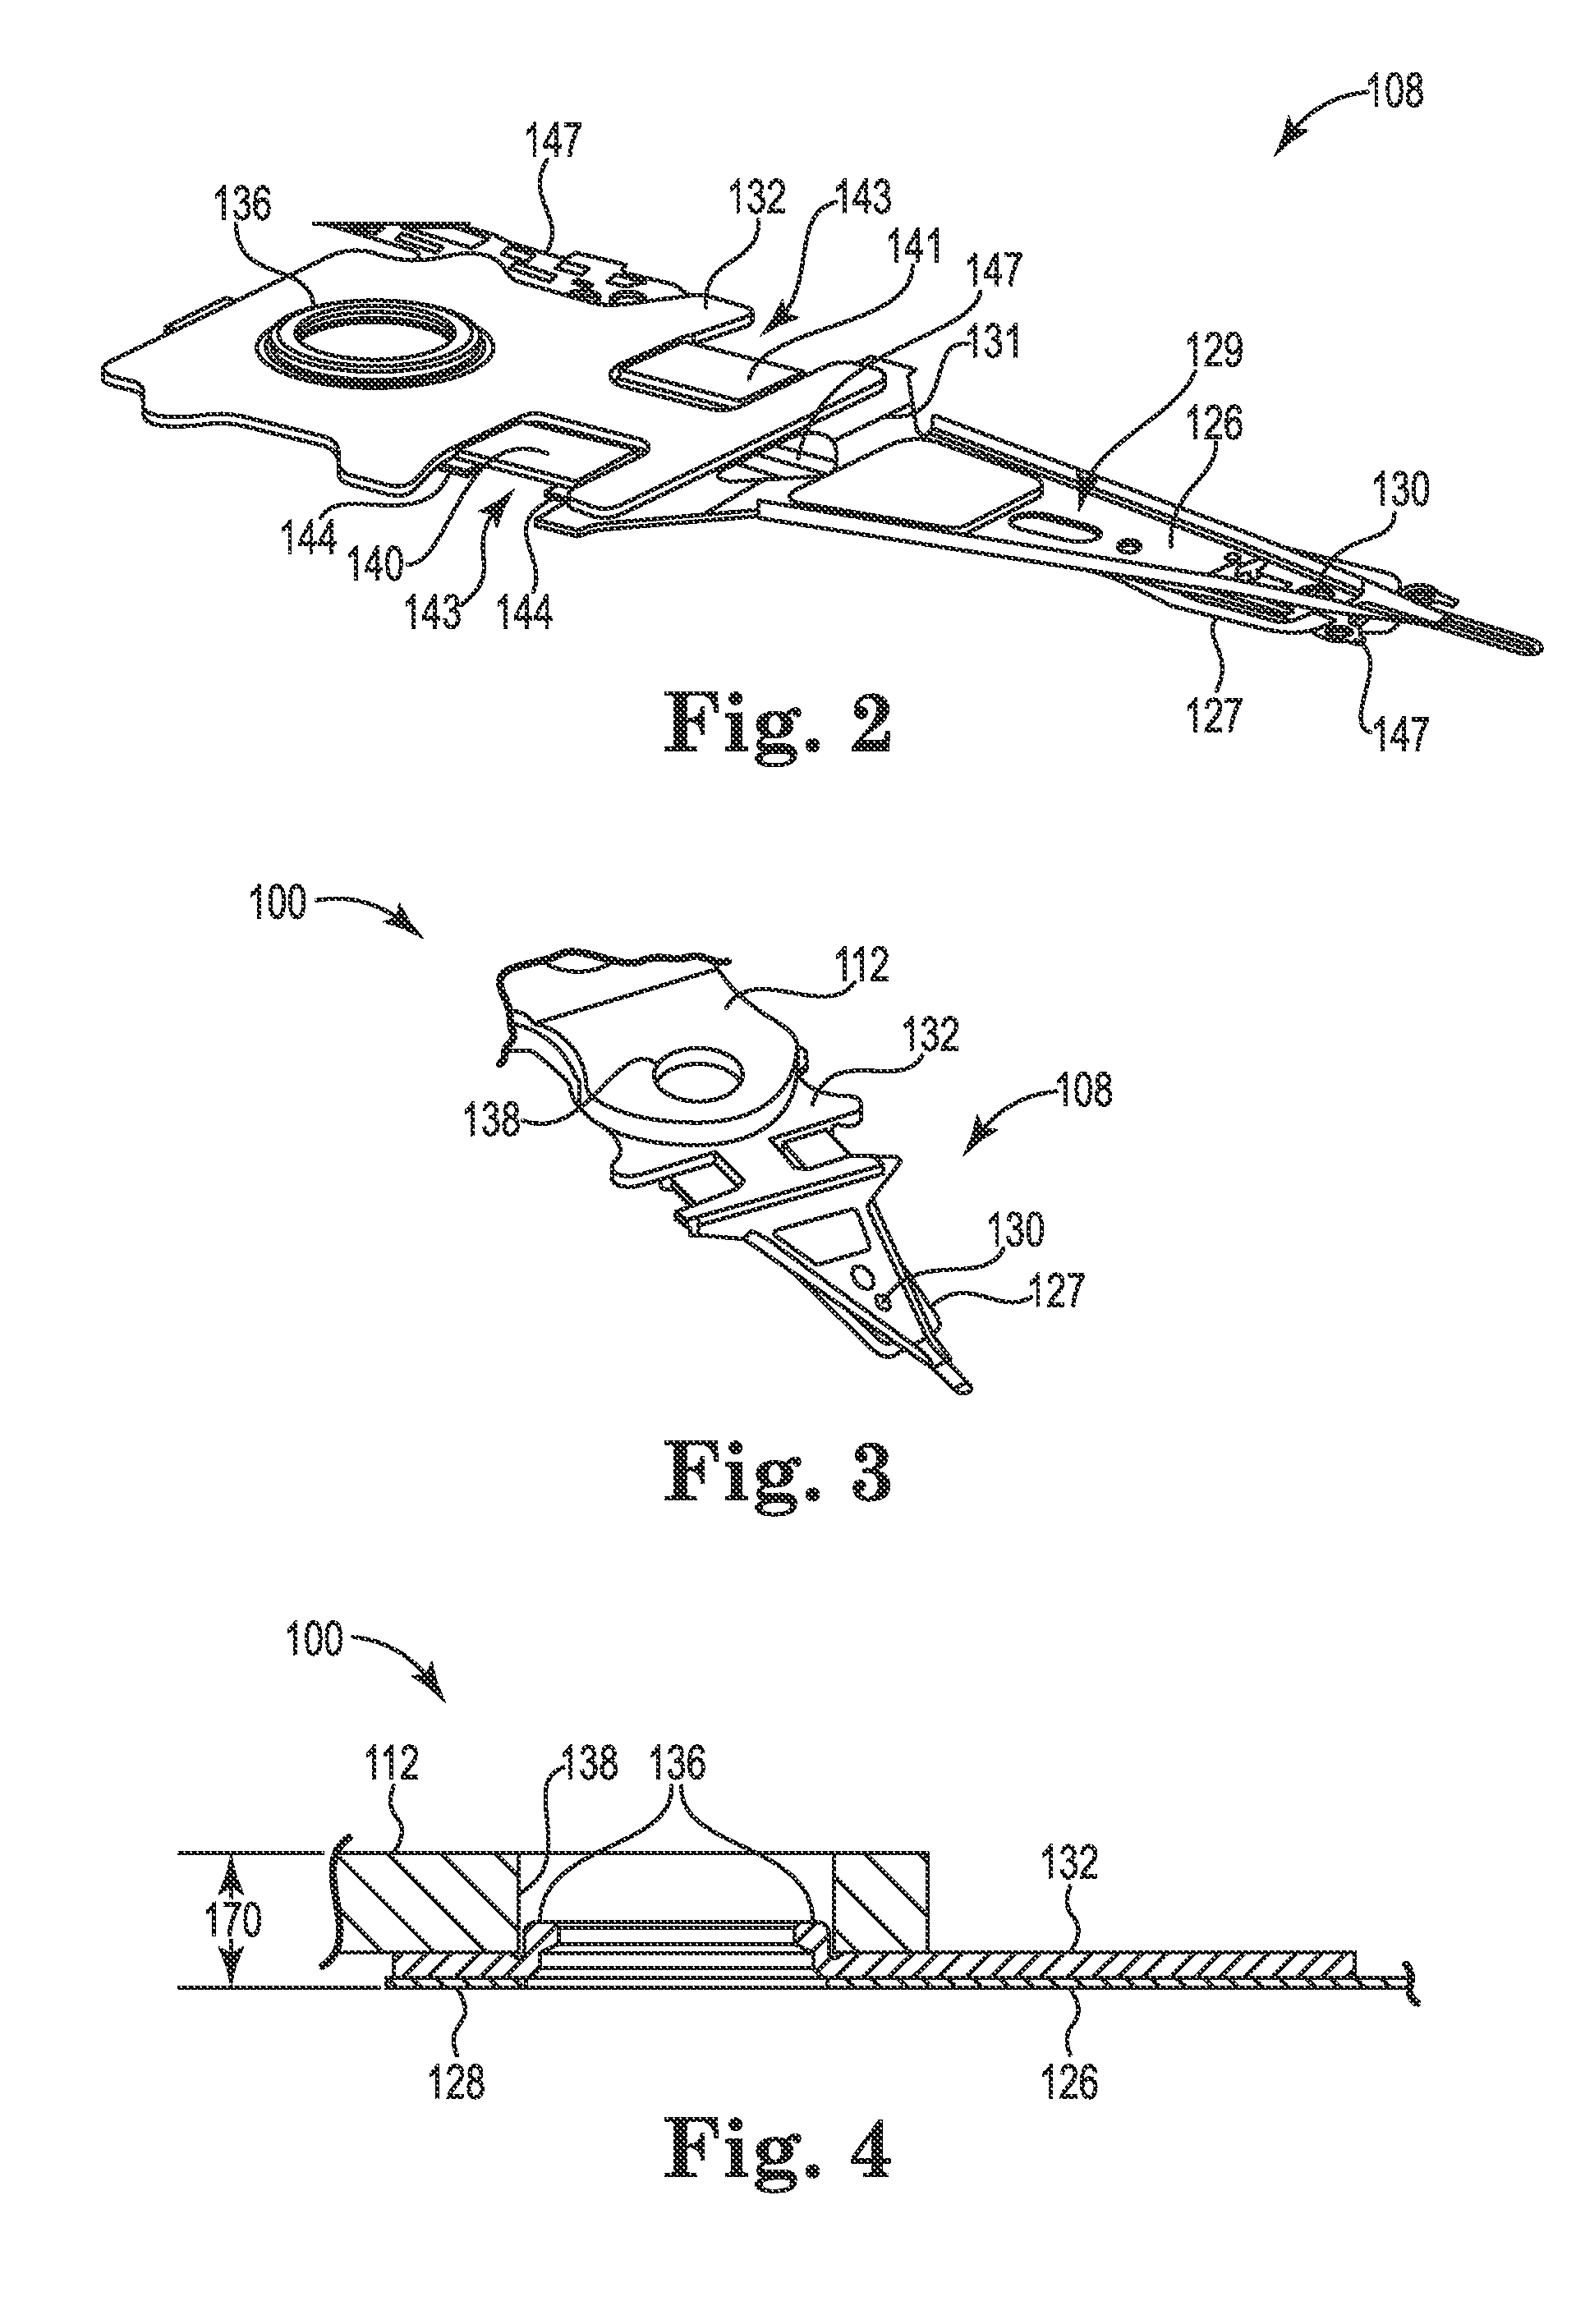 Circuit connection pad design for improved electrical robustness using conductive epoxy